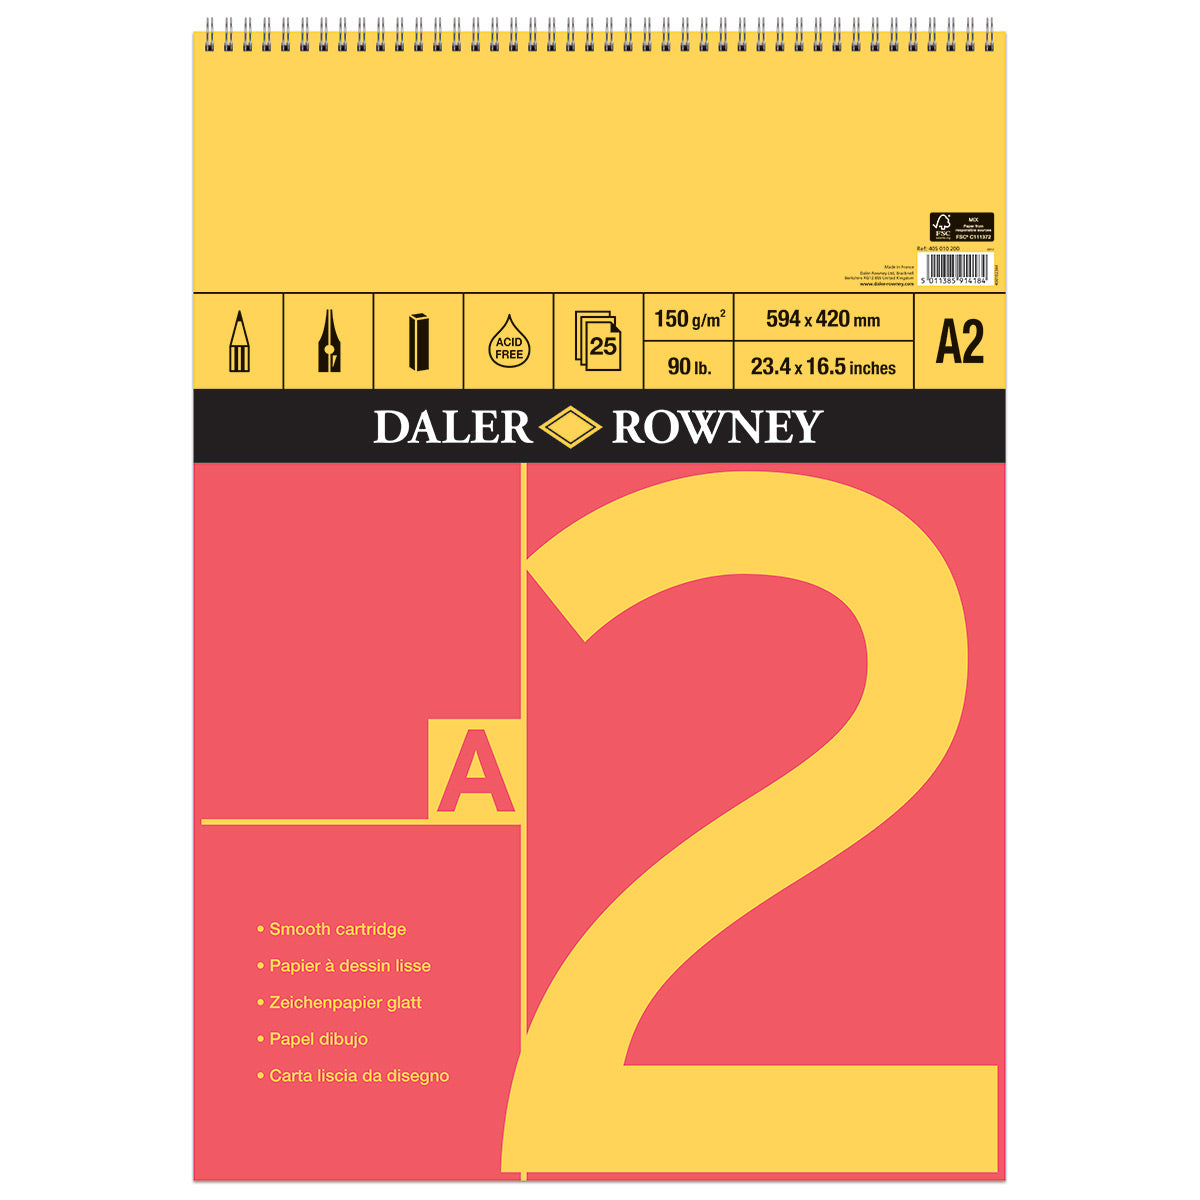 Daler Rowney - Red & Yellow Spiral Cartridge Sketch Pad - A2 - 150gsm - 25 Sheets